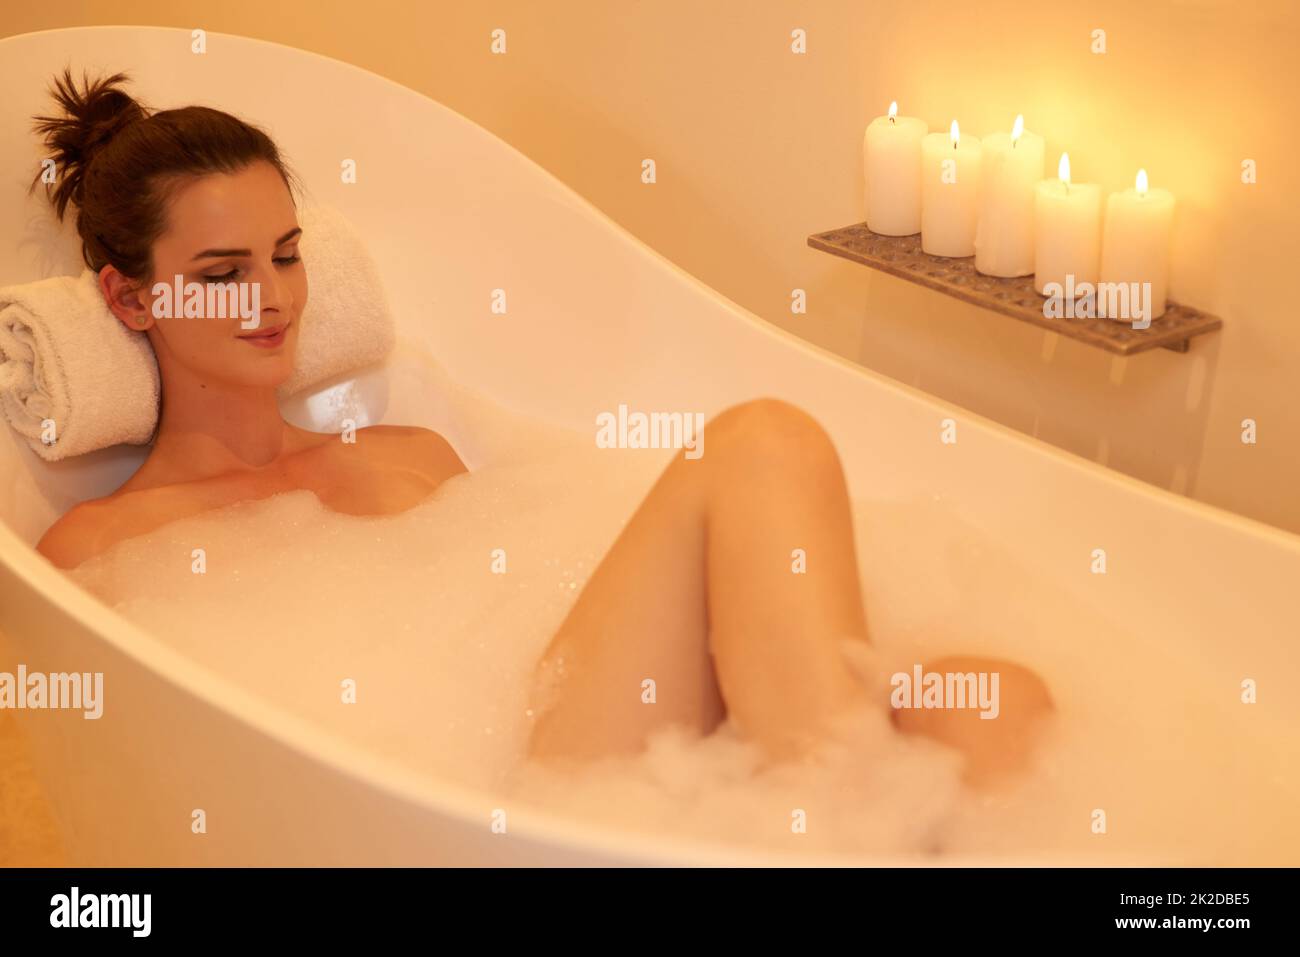 The perfect way to end off the day. High angle shot of an attractive young woman taking a bubble bath. Stock Photo